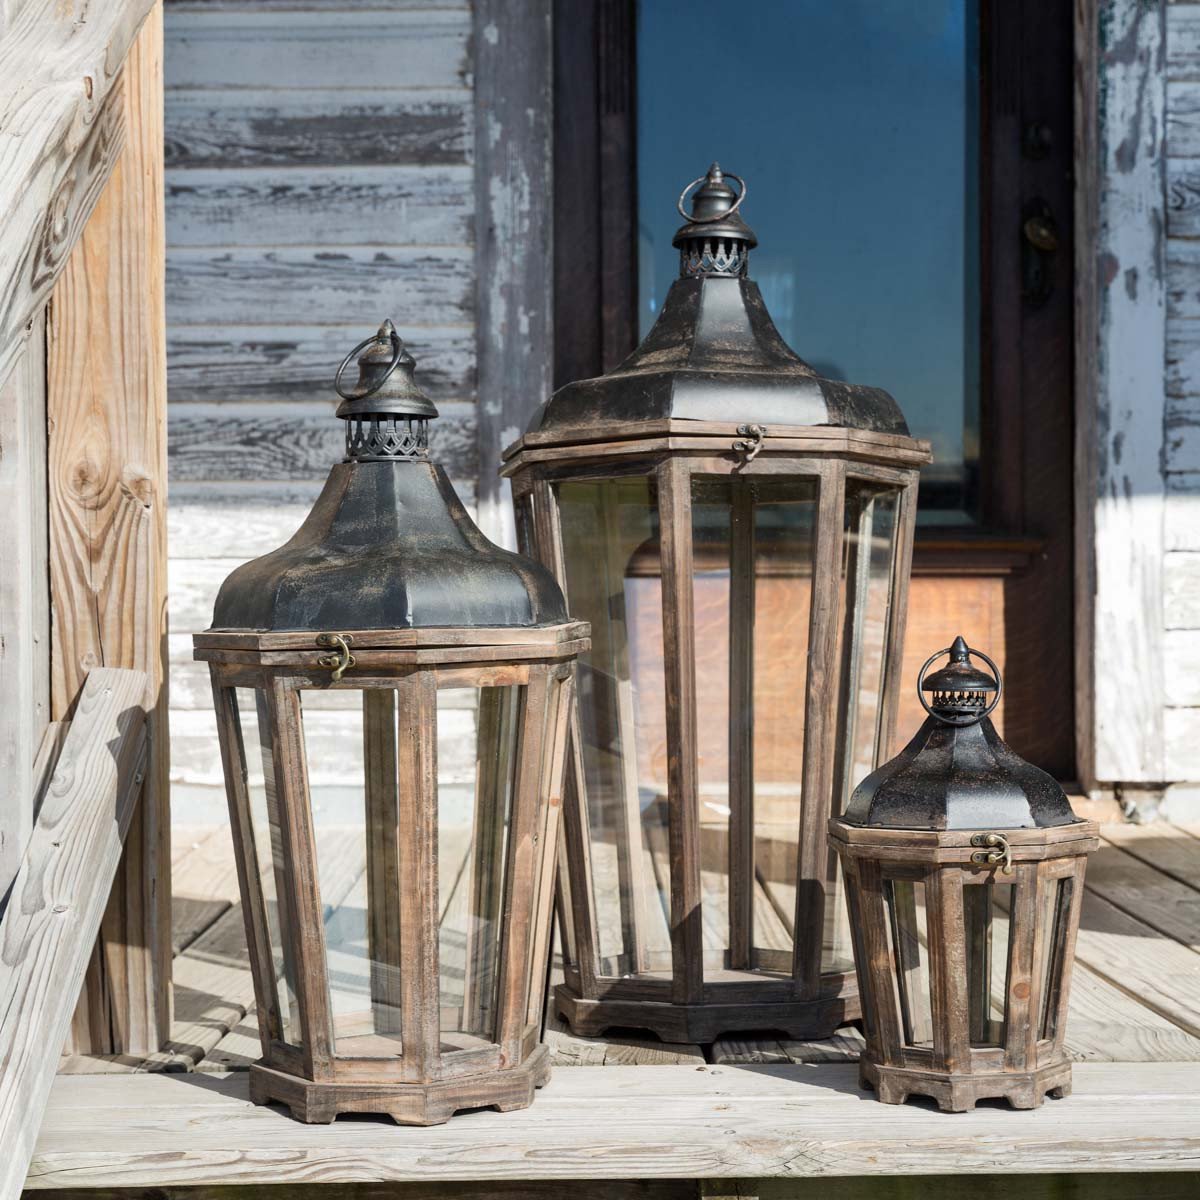 Wood & Galvanized Metal Hillcrest Lanterns by Park Hill Collection, Set of 3 - Colonial House of Flowers | Atlanta